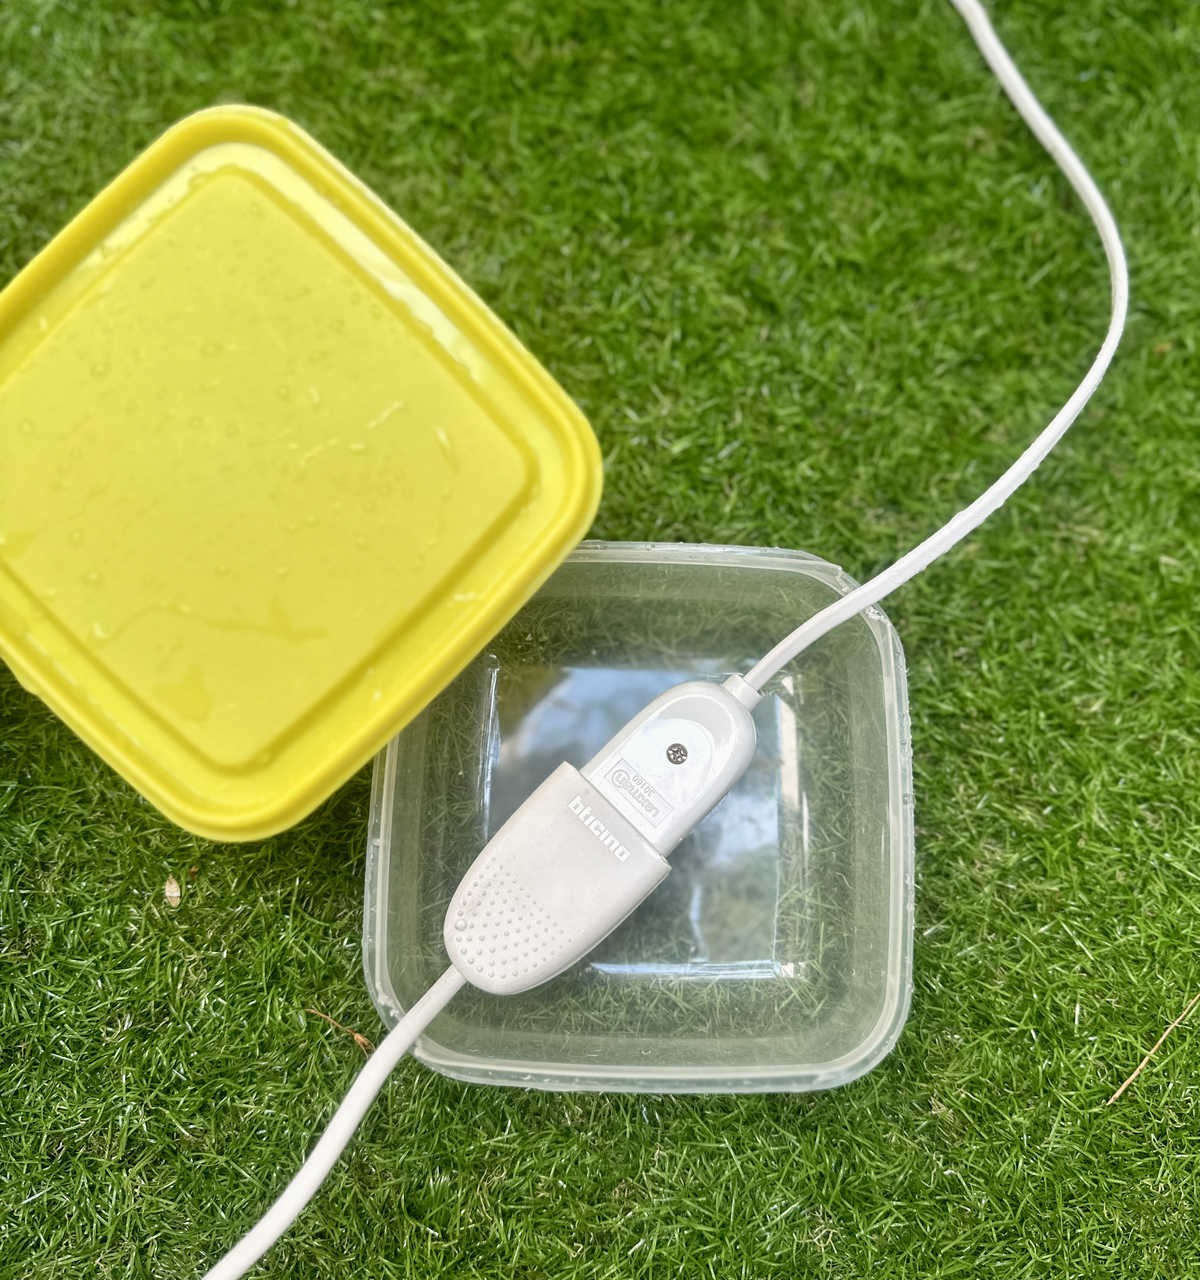 Cut the Corner of a Tupperware to Shelter Plugs From the Rain